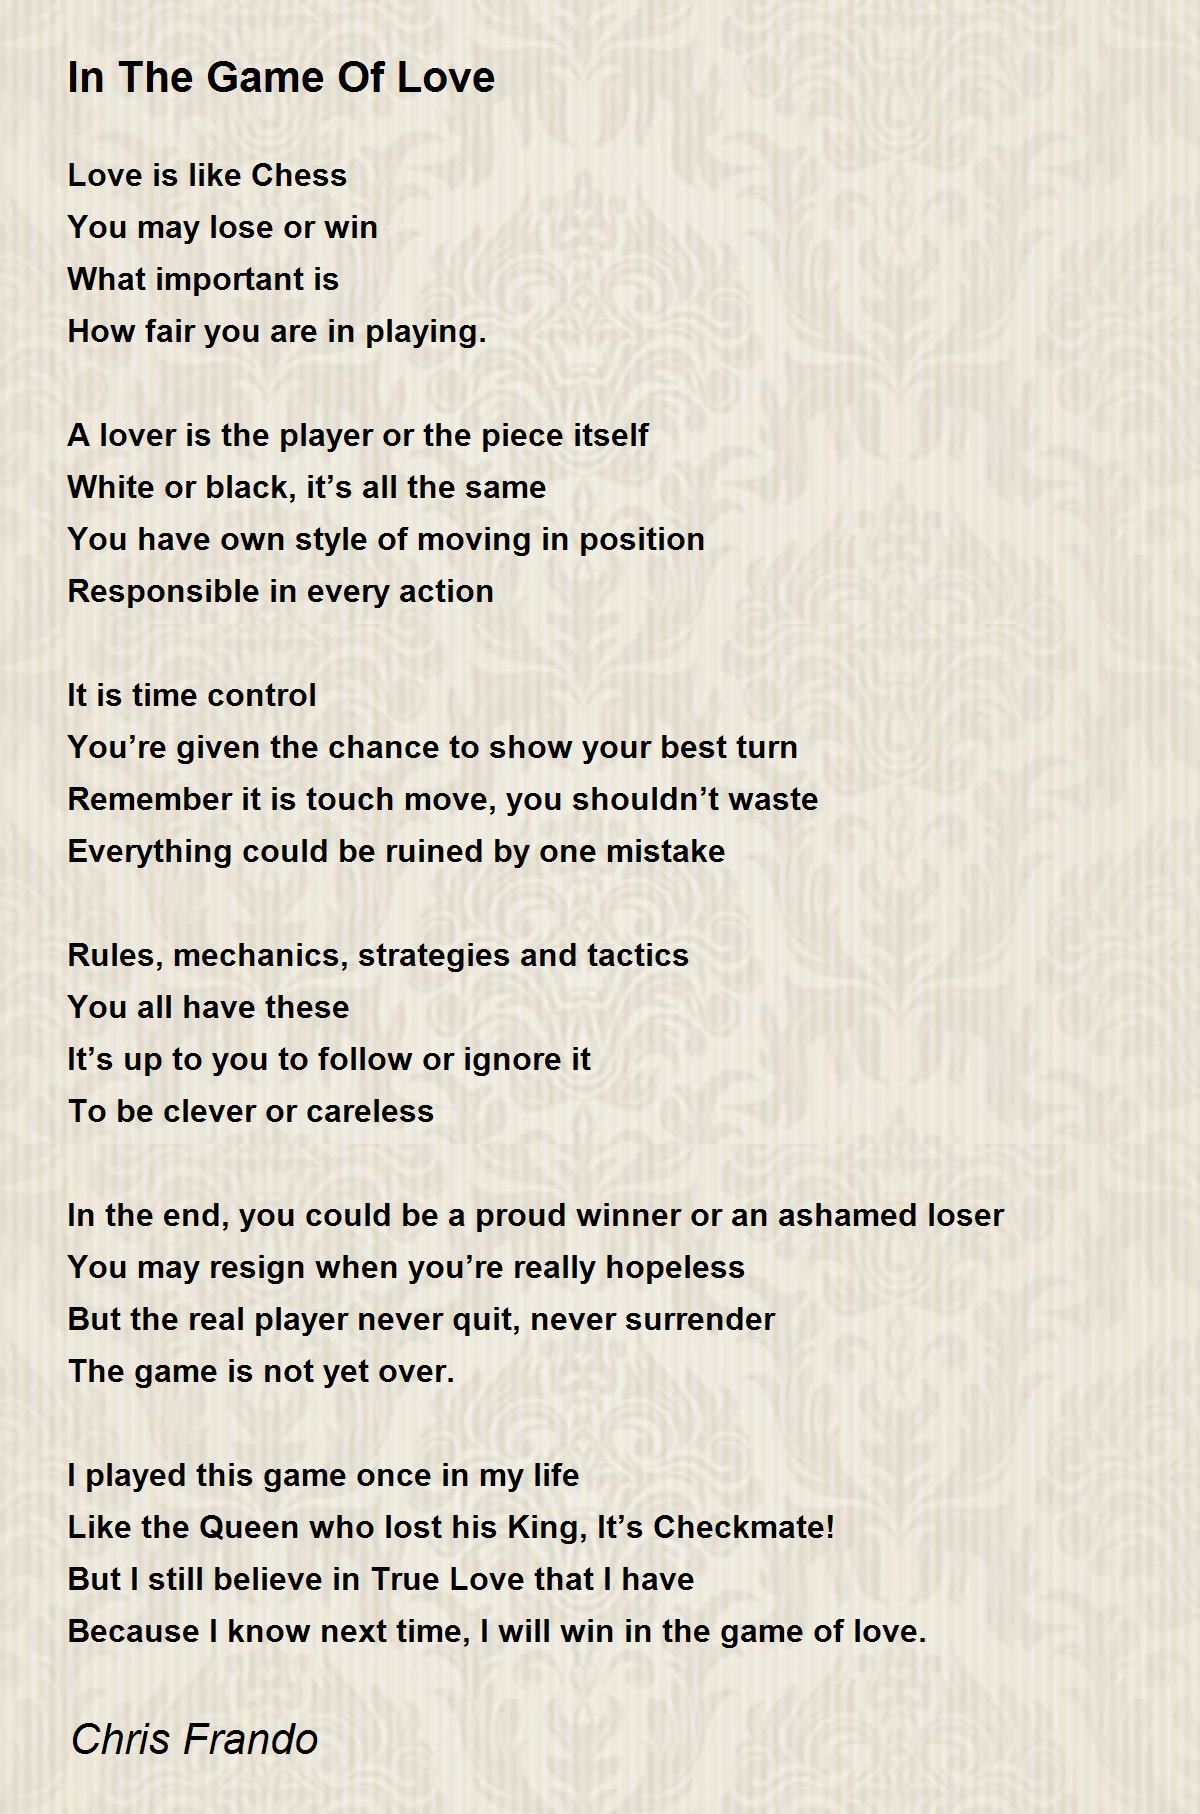 In The Game Of Love - In The Game Of Love Poem by Chris Frando